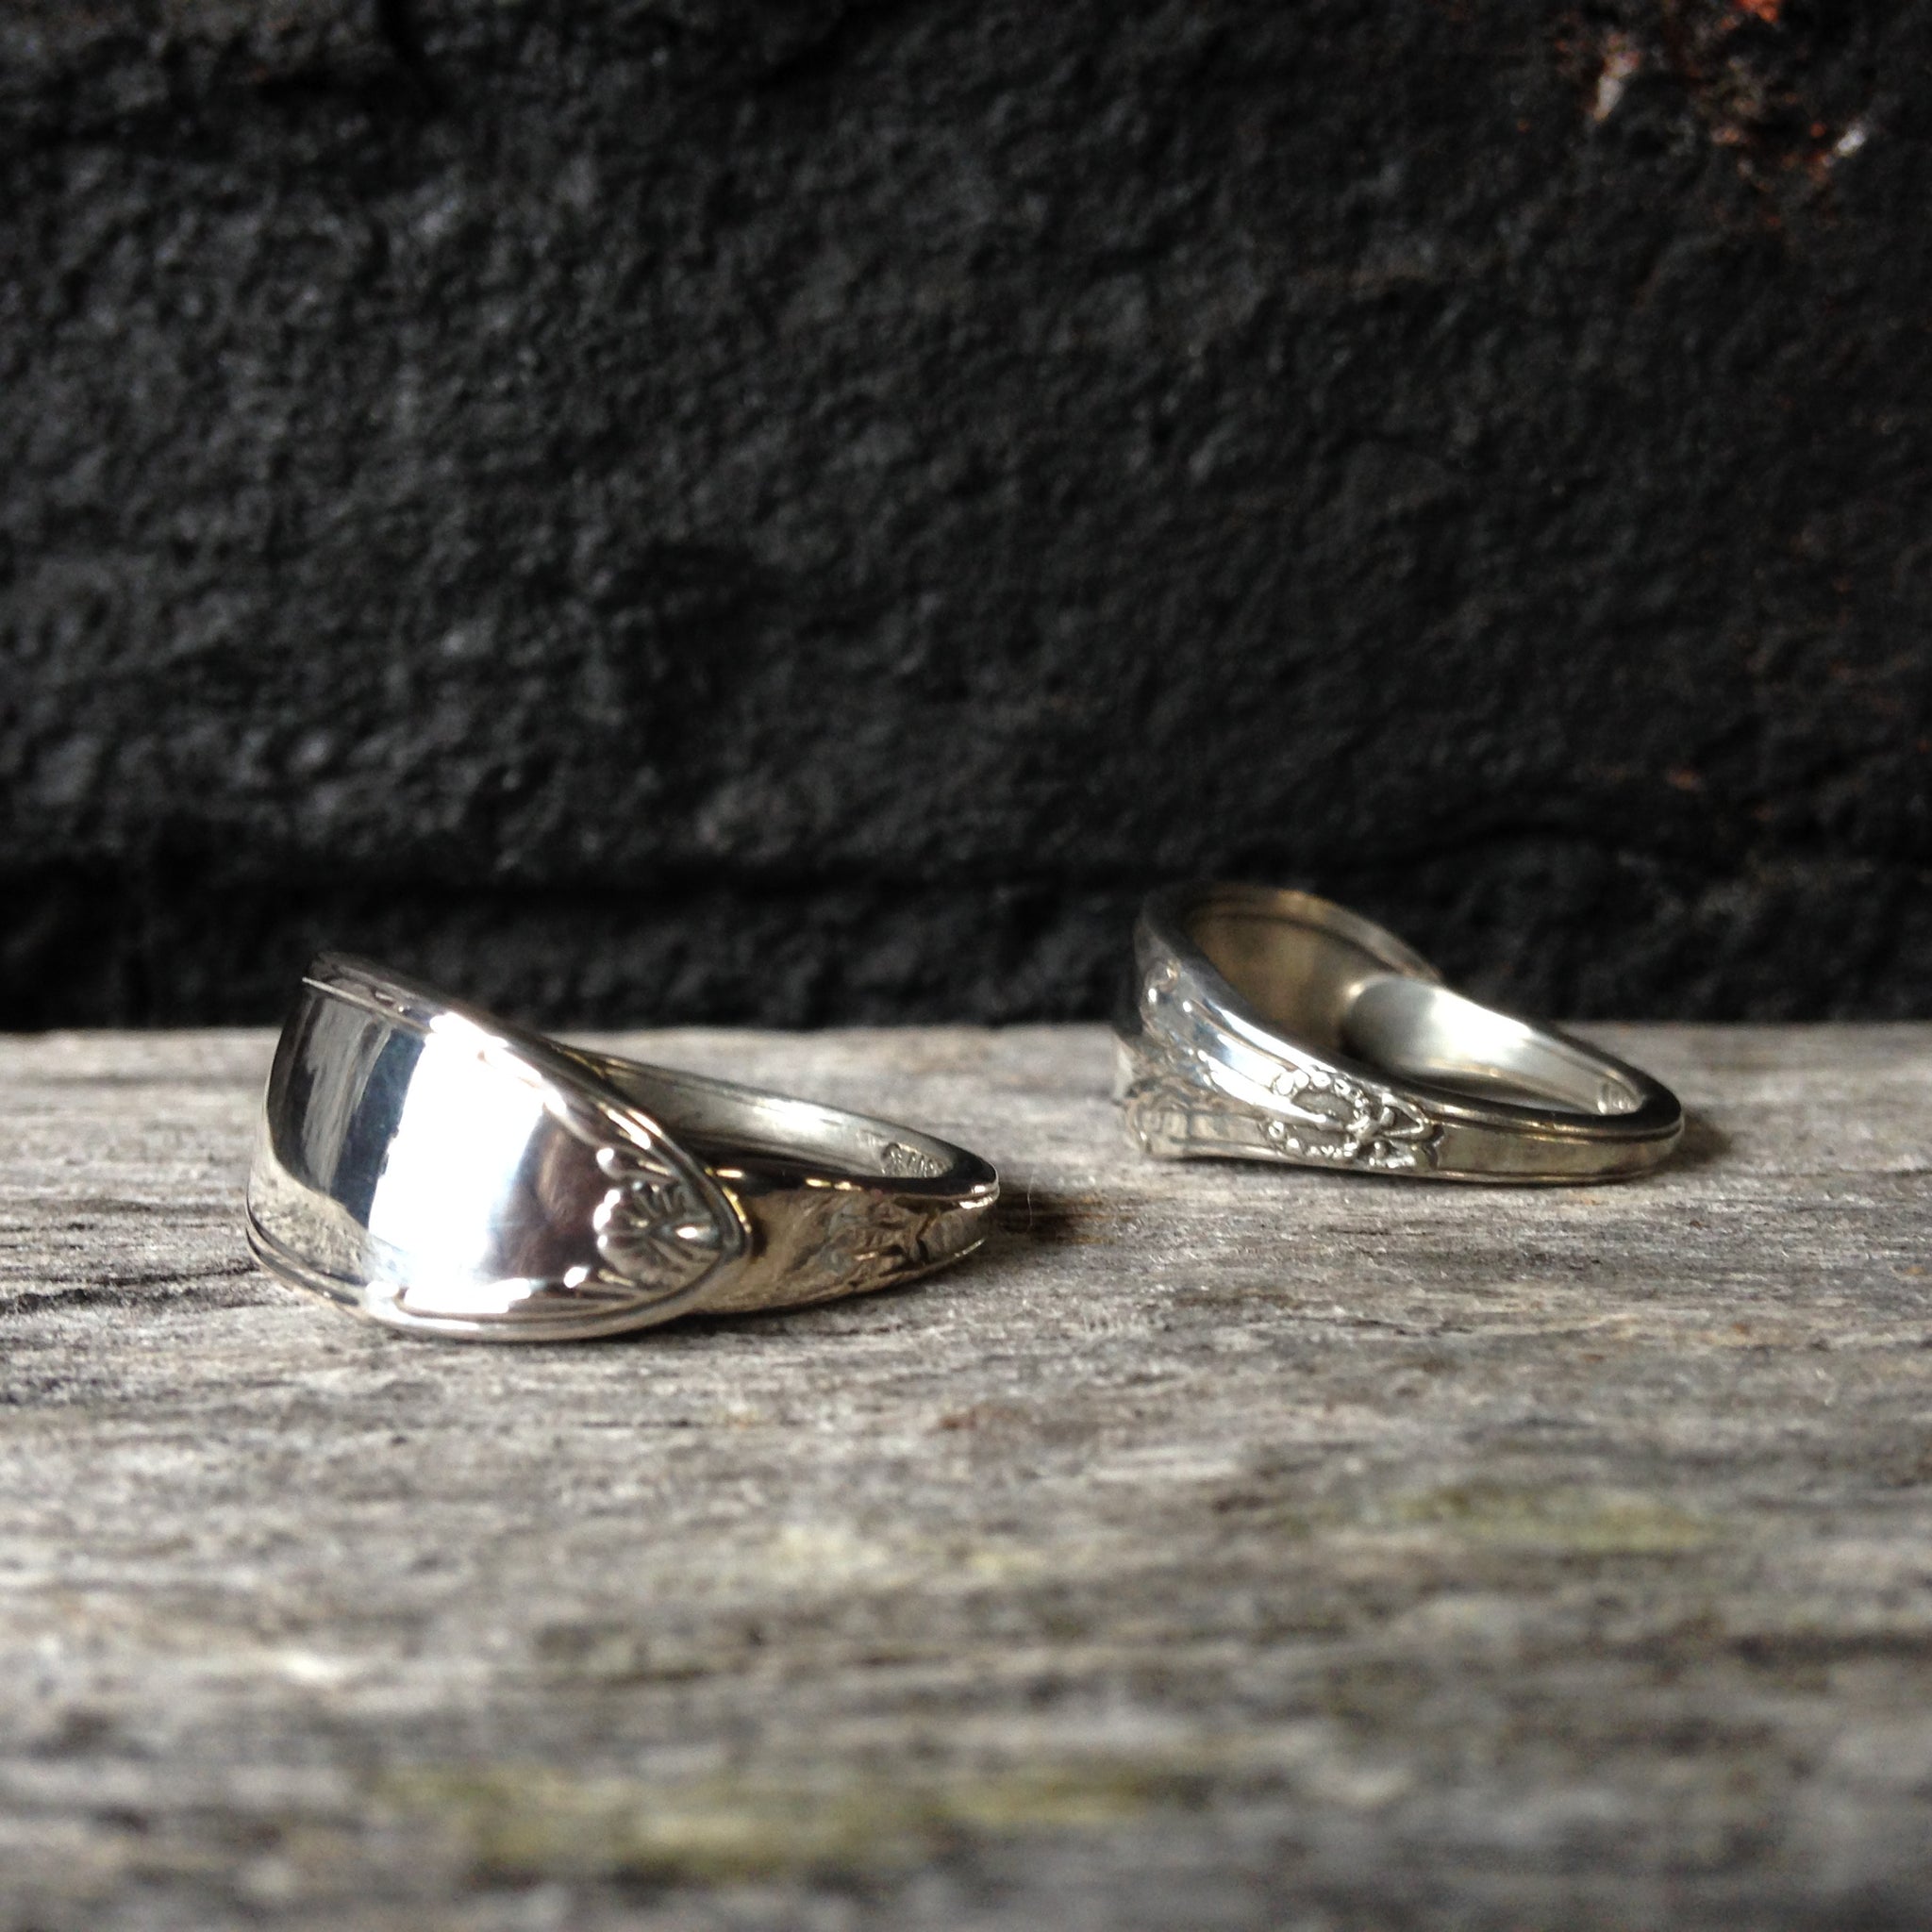 Bespoke spoon ring handcrafted from your spoon